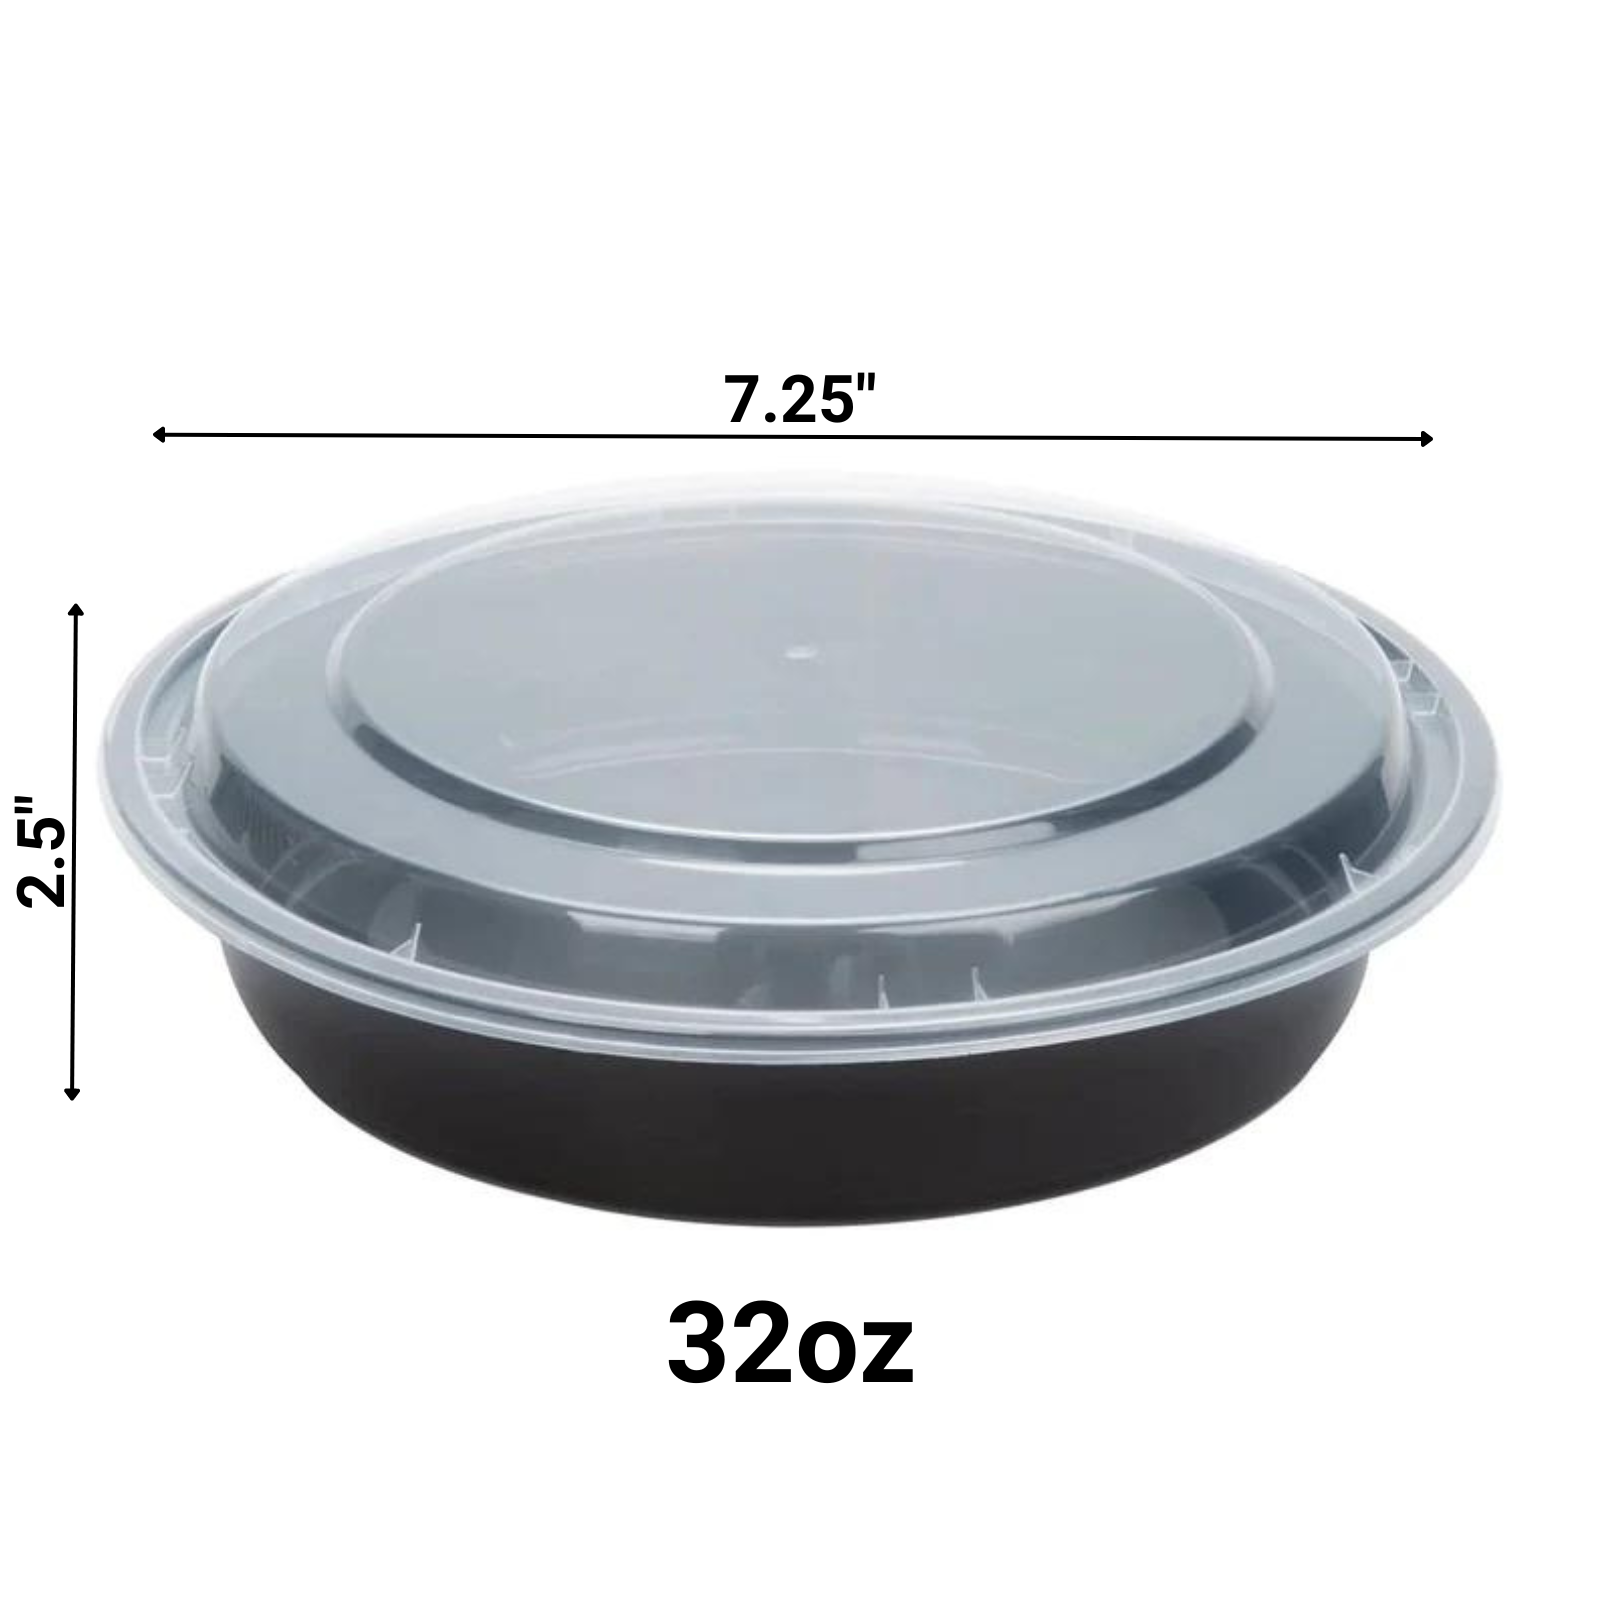 *WHOLESALE*  32oz Black Meal Prep/ Bento Box Container with Clear Lid | 150ct/Case Food Storage & Serving VeZee   